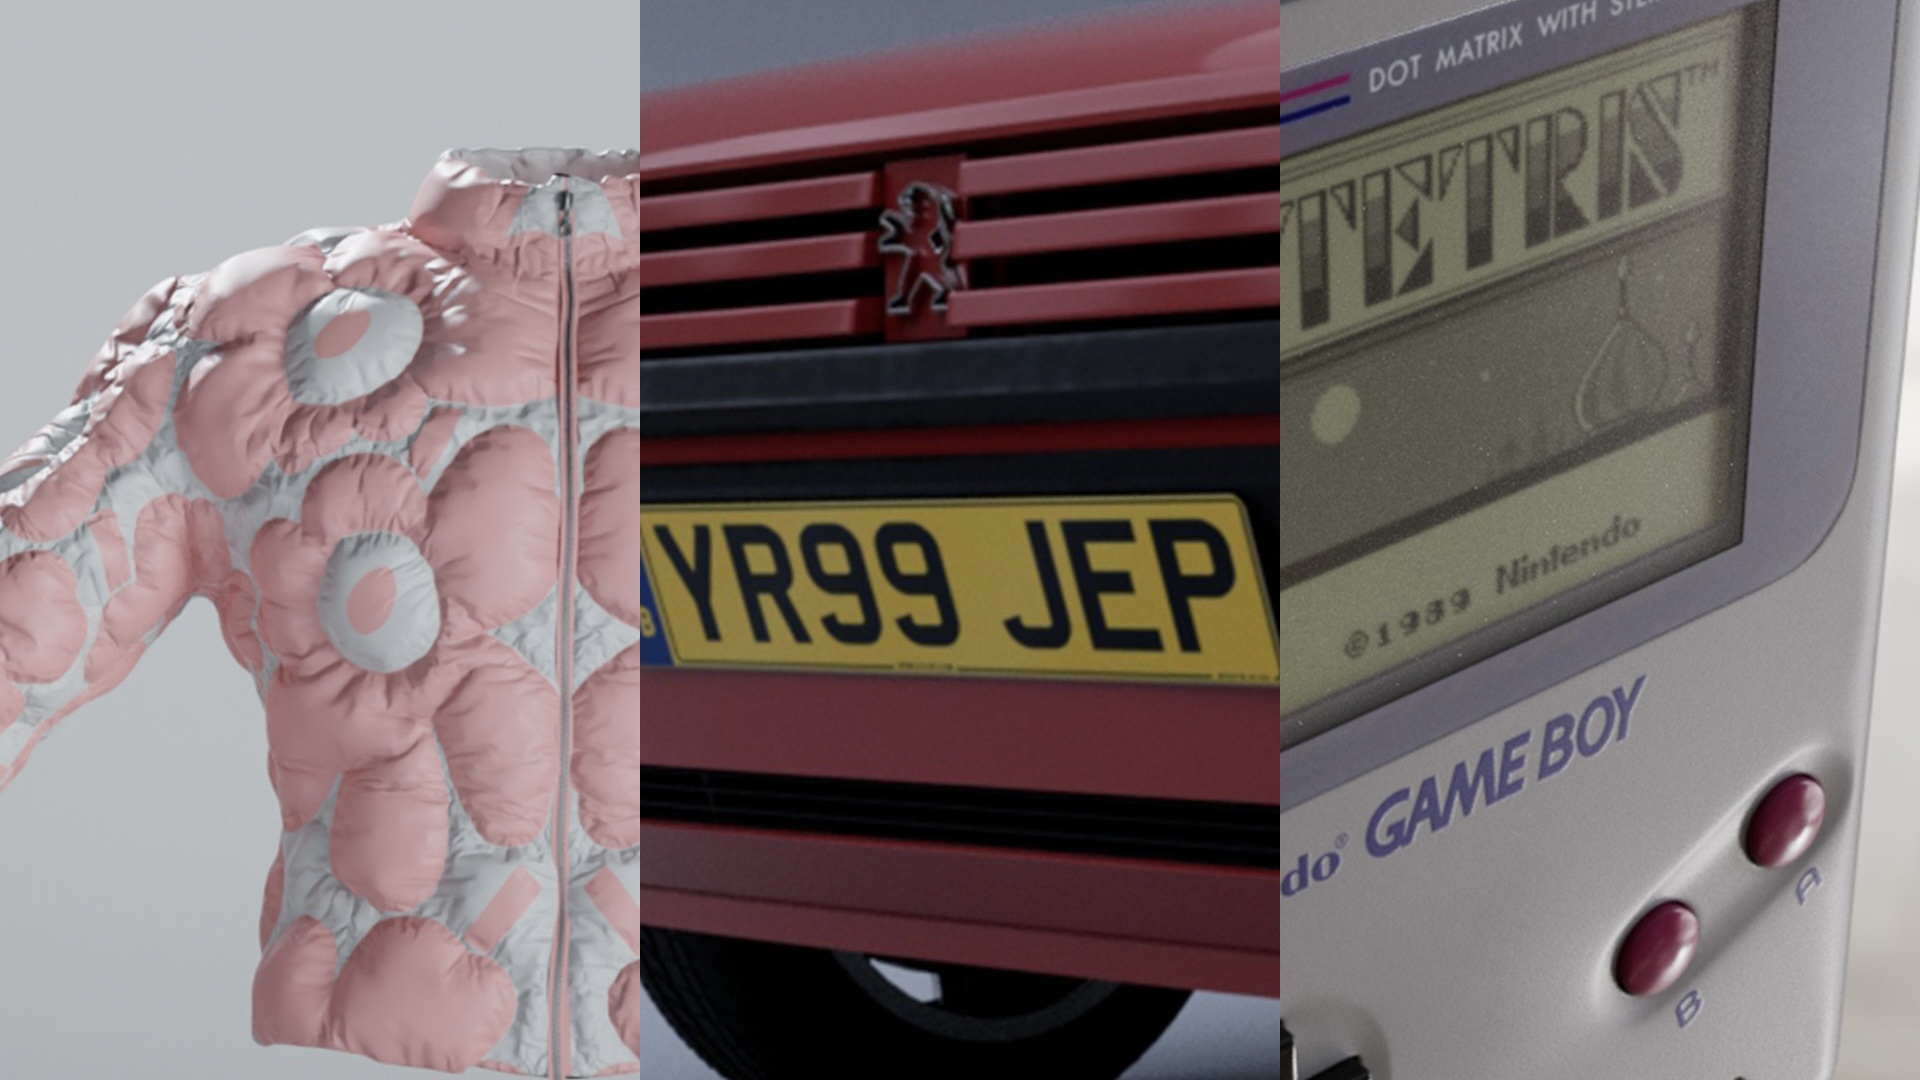 This image shows the three 3D models created by Tom Ambrose for their final major project including a pink and white puffer jacket, a game boy and a red car.